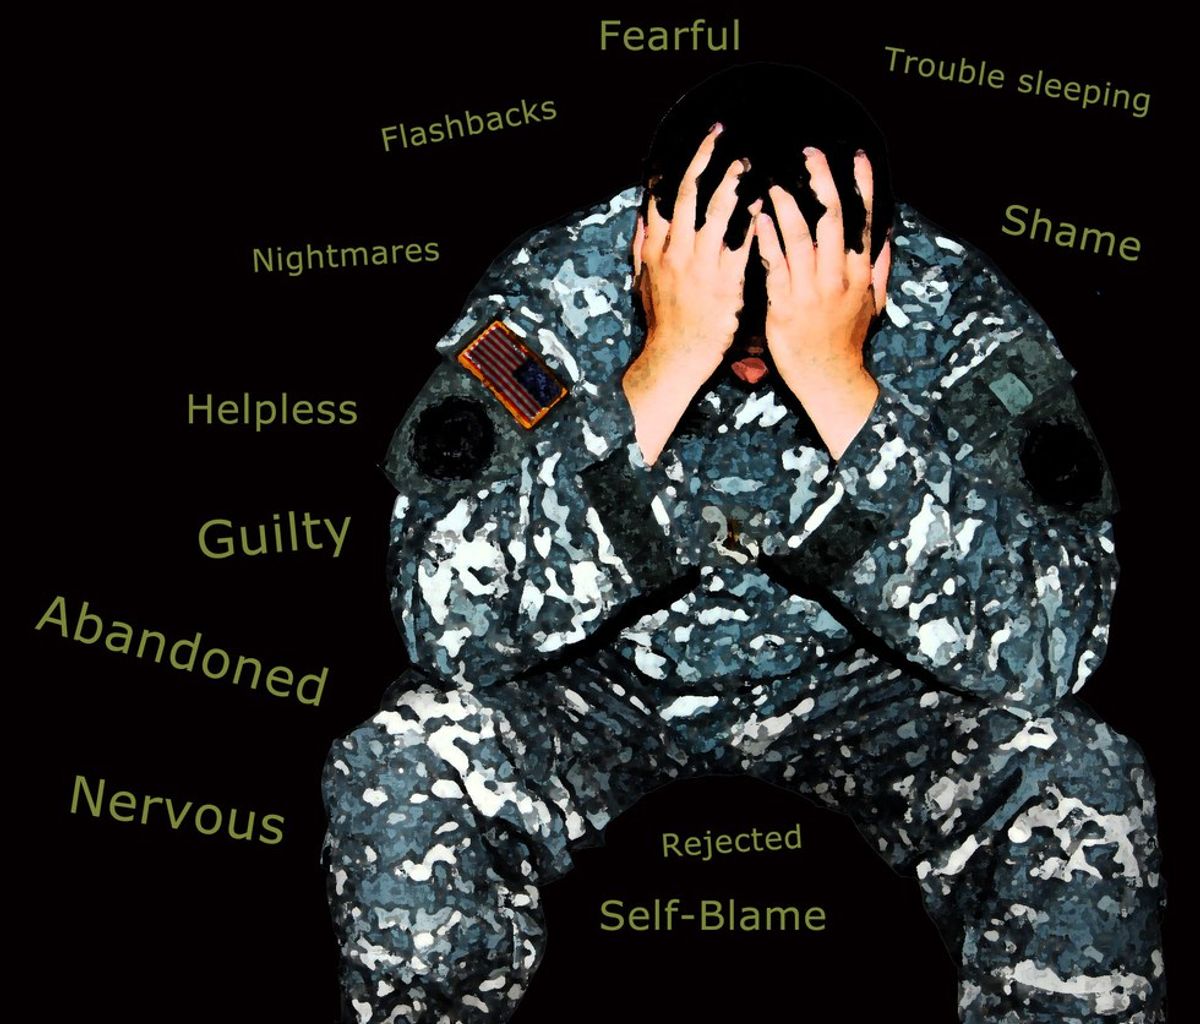 Veterans And Suicide: How Can We Help Solve This Growing Problem?